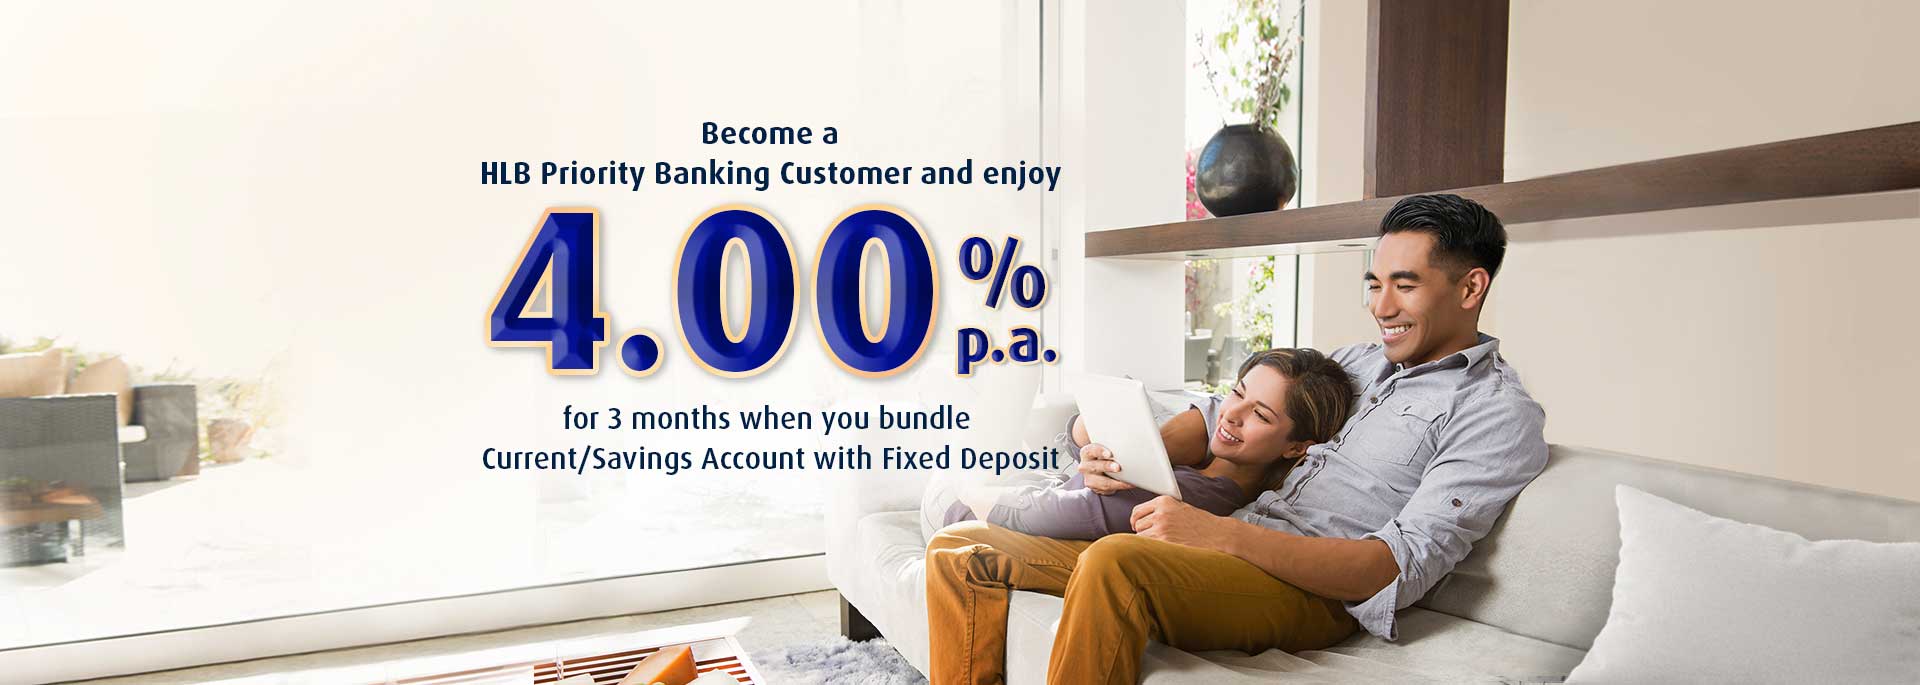 Enjoy higher returns of 4.00% p.a. when you bundle Fixed Deposit with Current/Savings Account